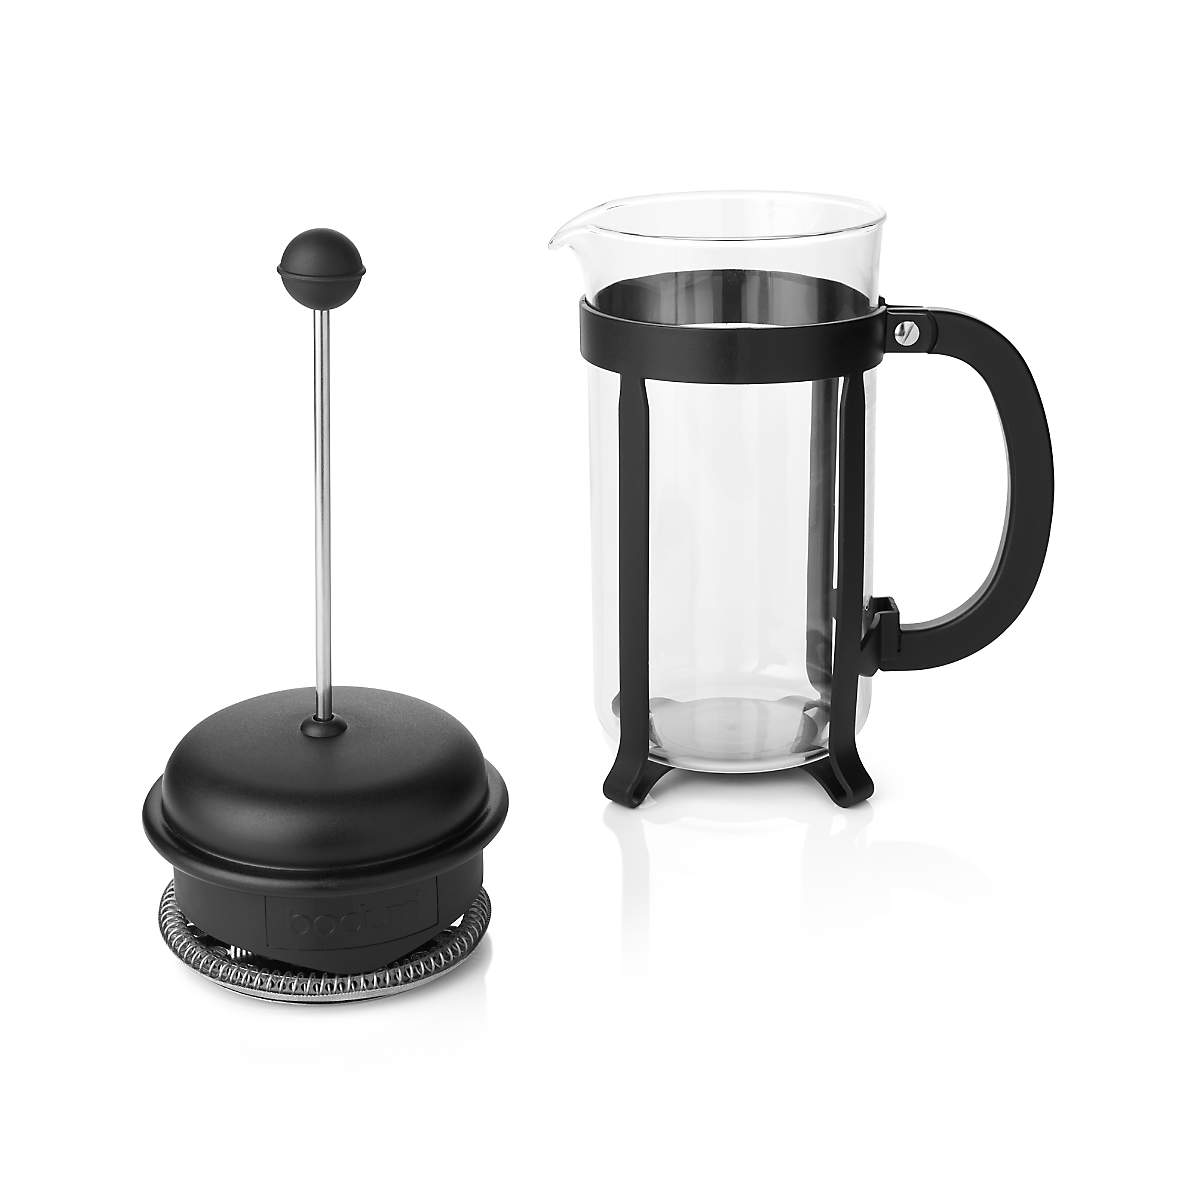 Brilliant Basics One Cup Coffee Plunger - Black